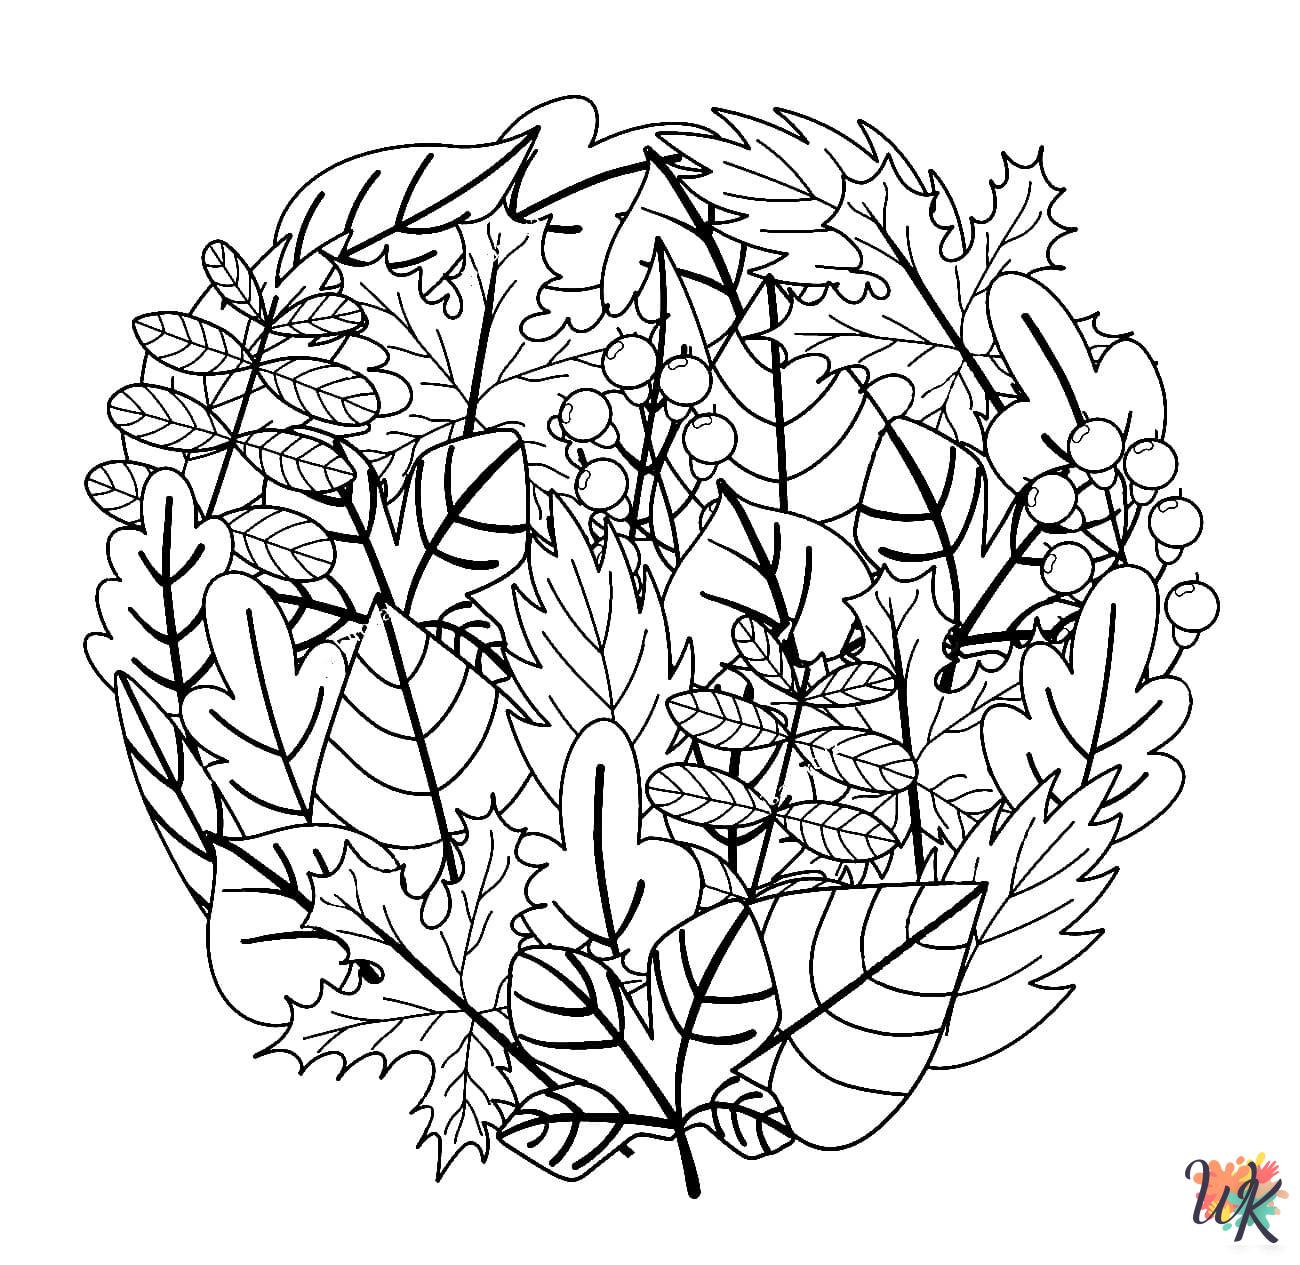 Fall Leaves coloring pages for adults